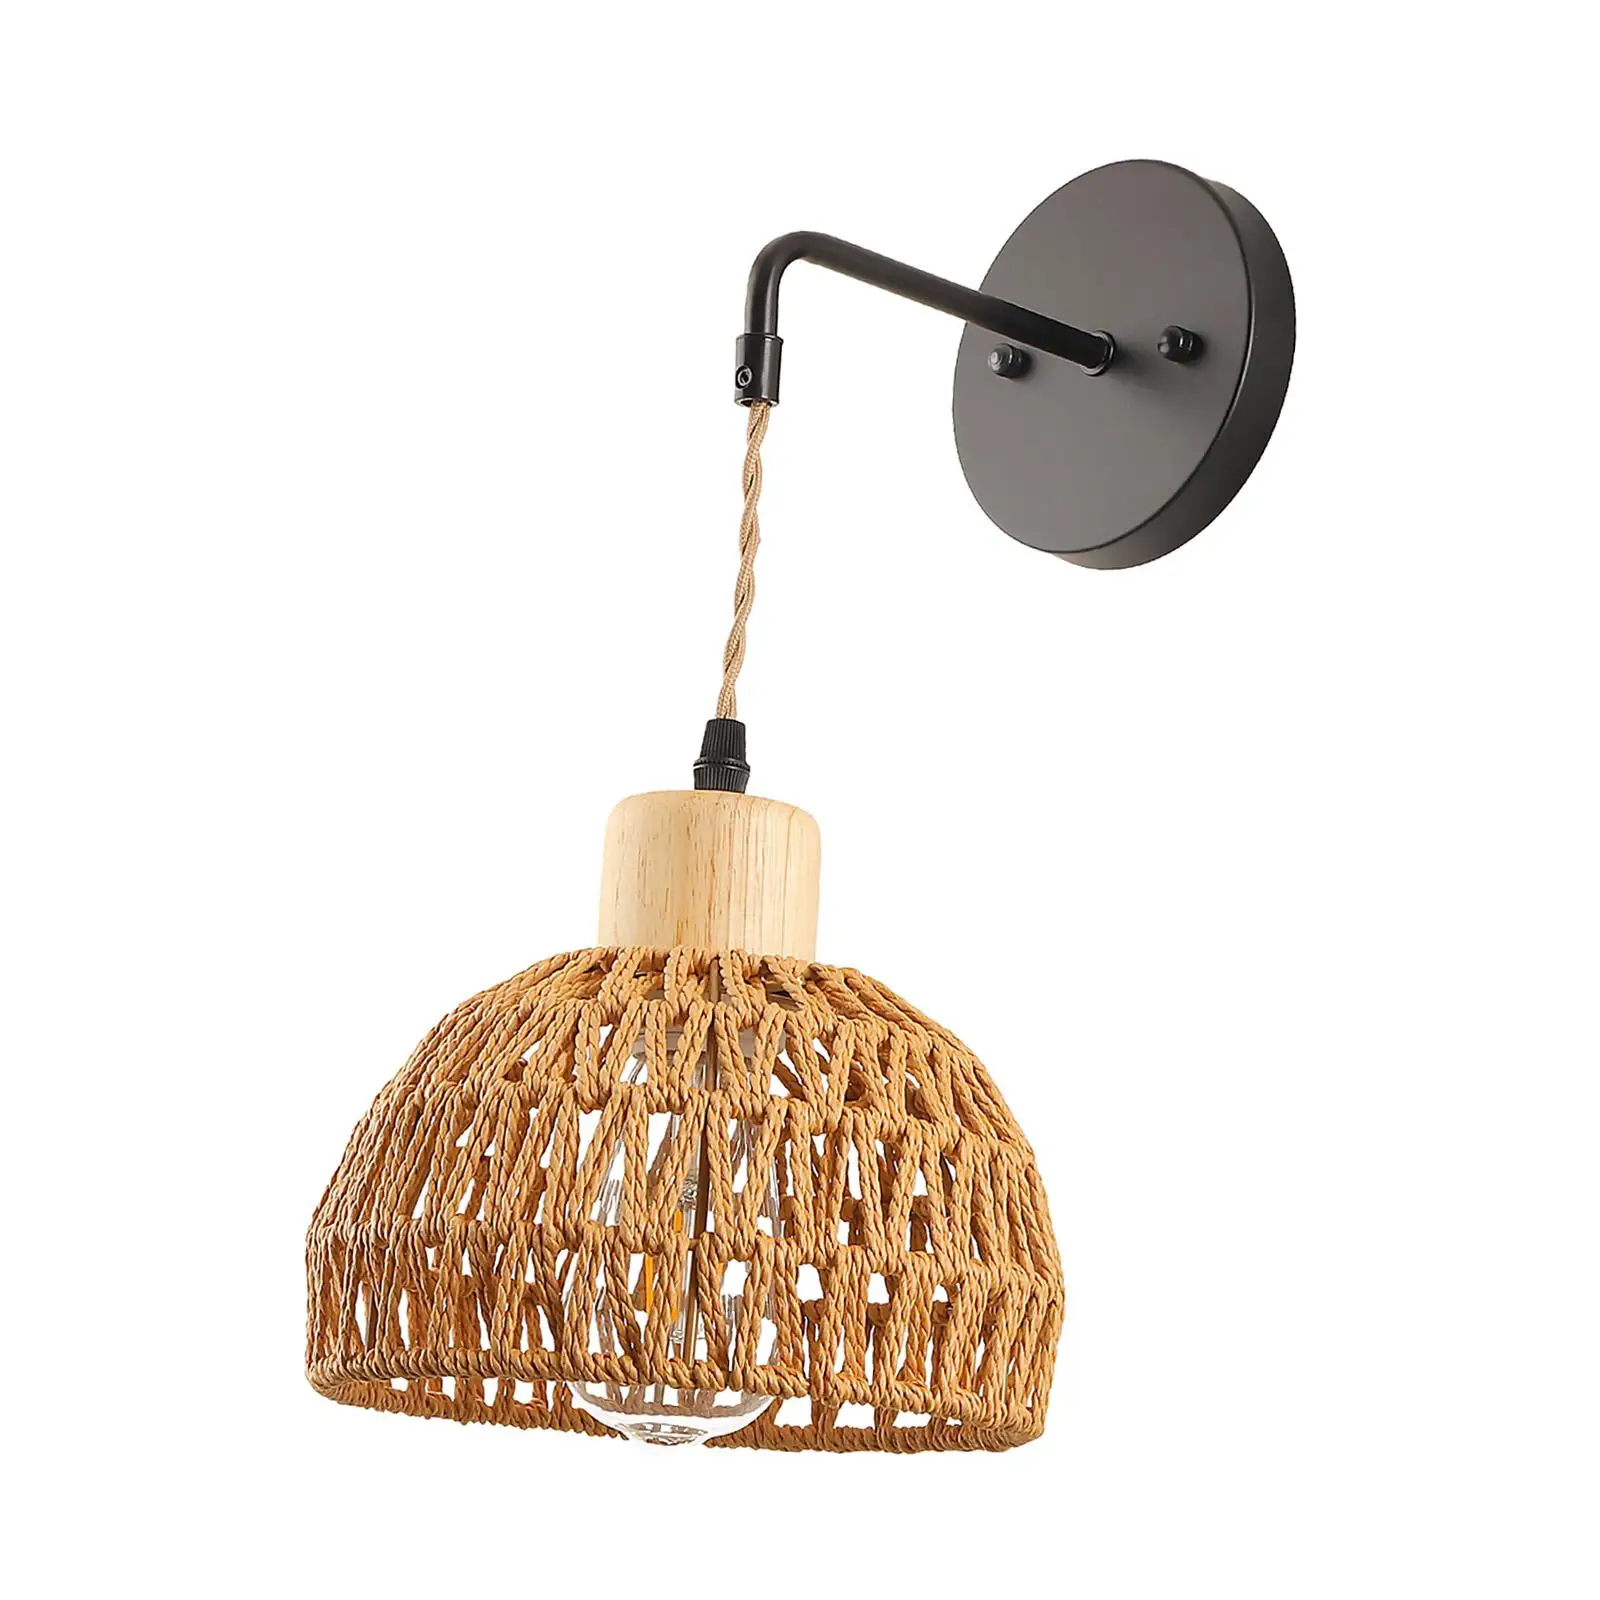 Rattan Wall Sconce Rustic Hand Woven Wall Light for Bedroom Entry Restaurant